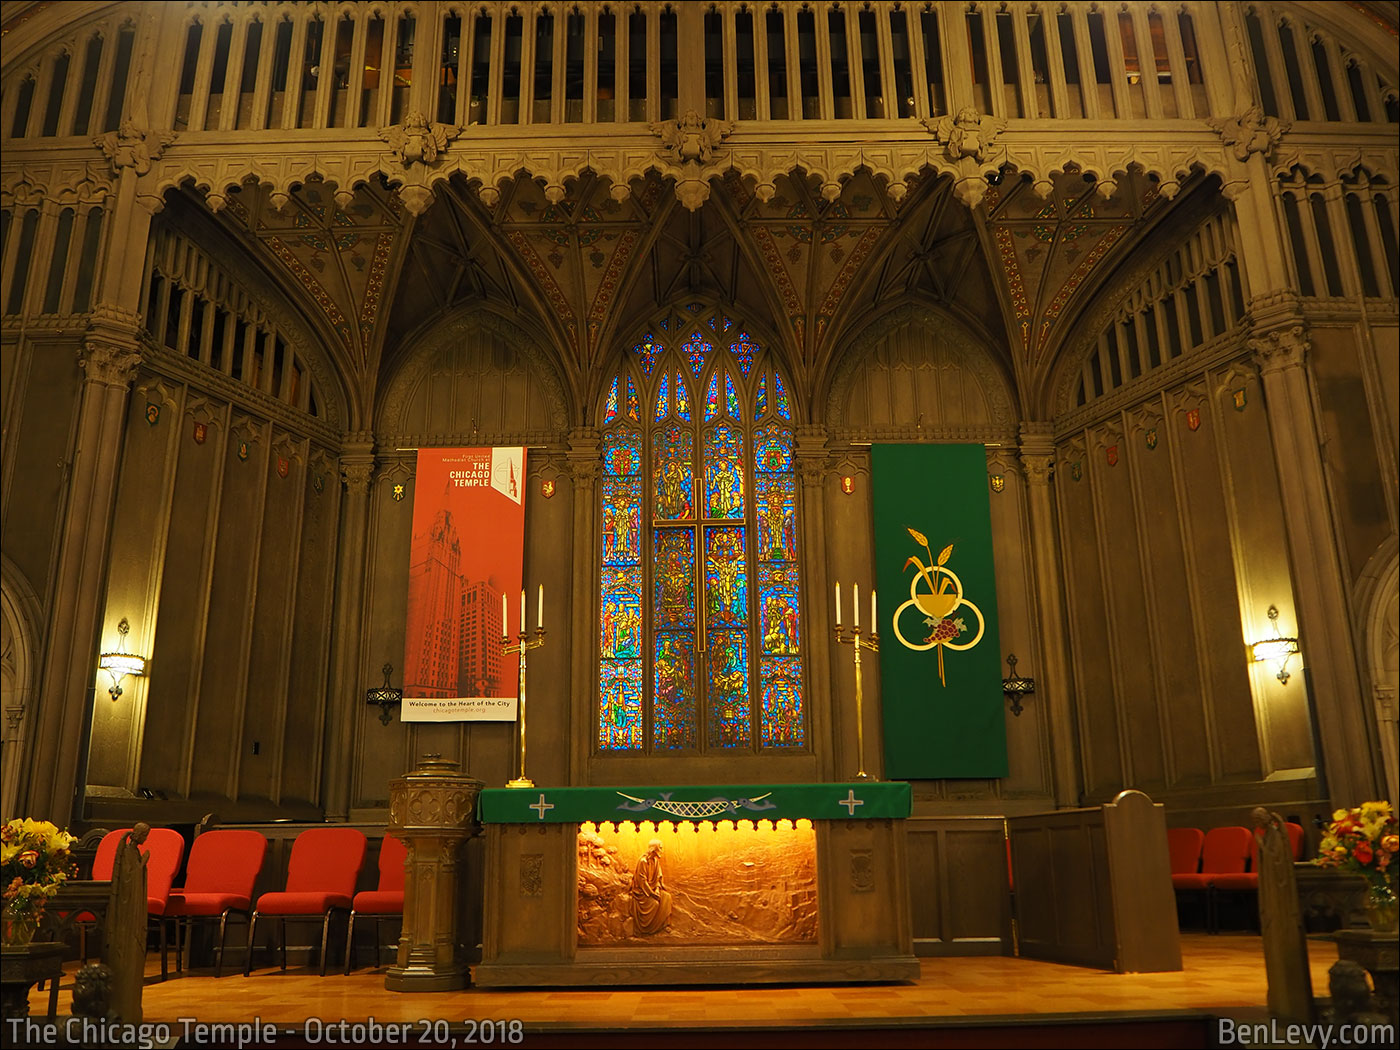 The apse at Chicago Temple